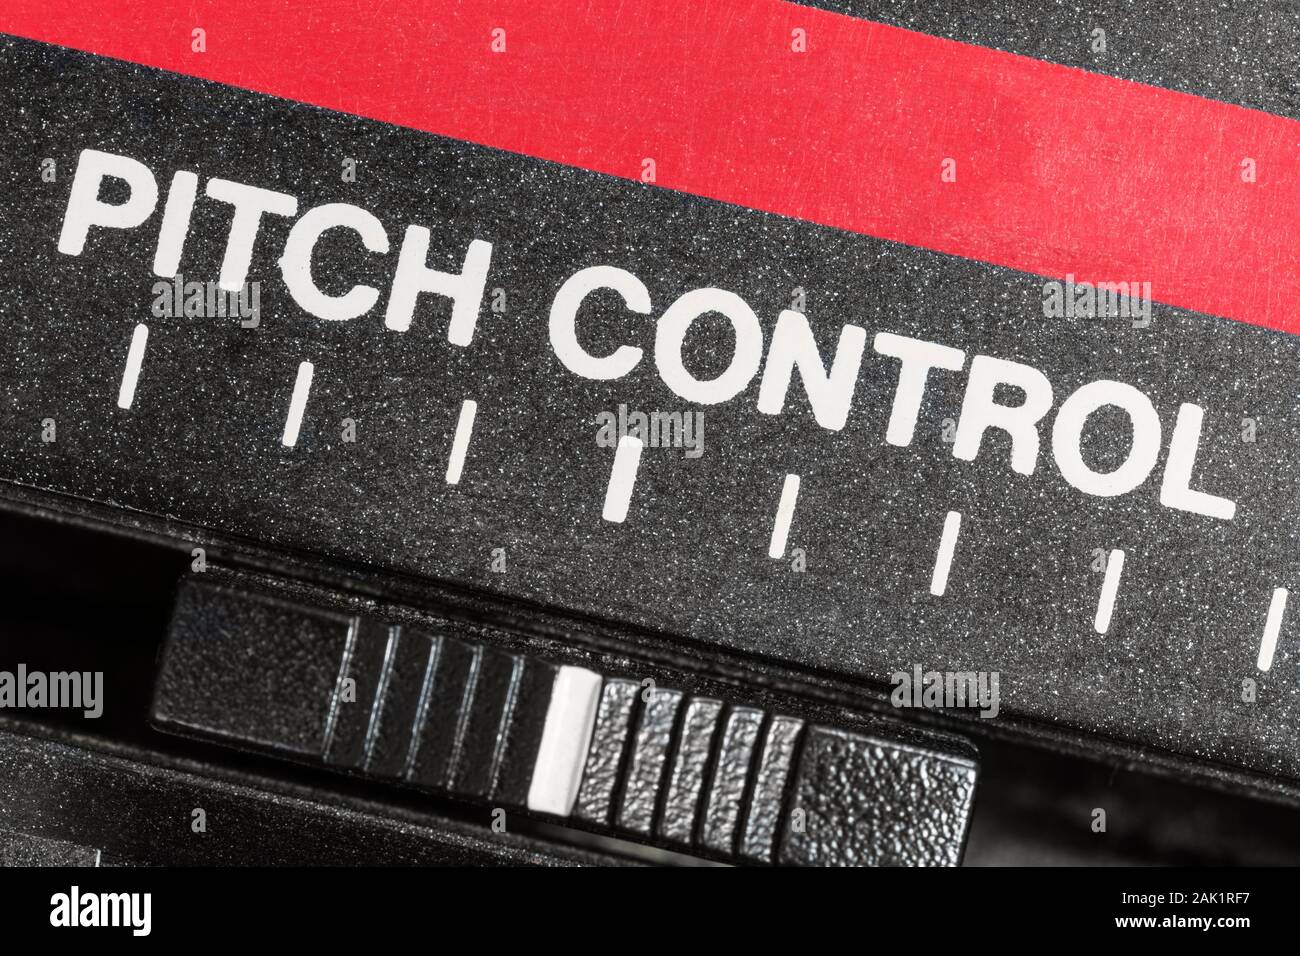 Macro close up view of vintage pitch control tape machine speed slider. Stock Photo